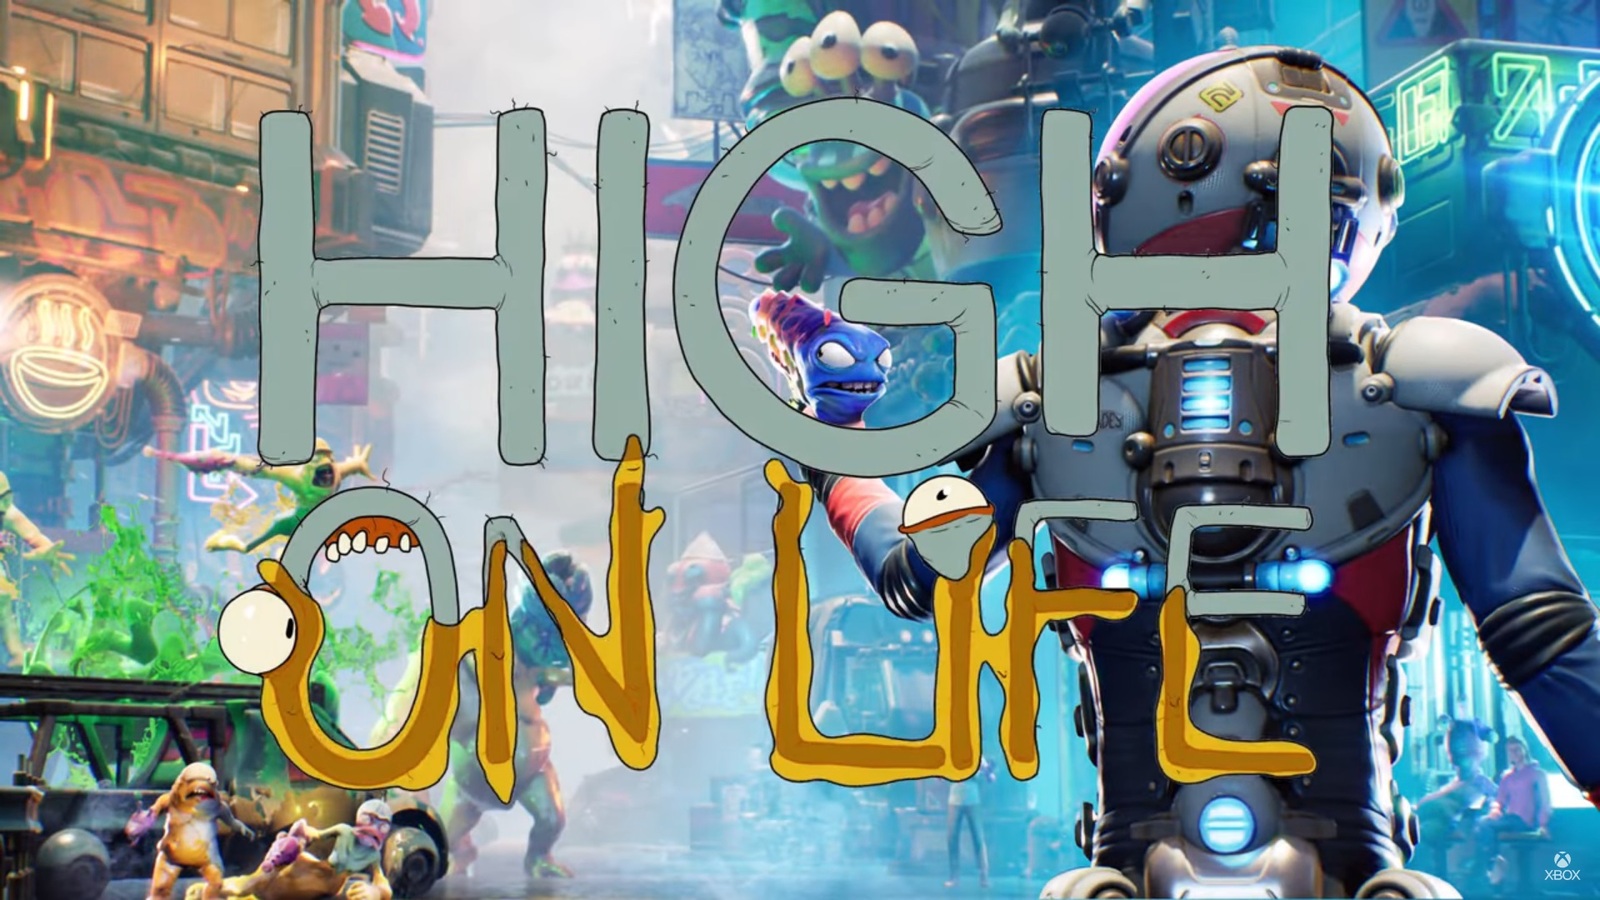 High On Life Will Have DLC And Other Additions Post-Launch